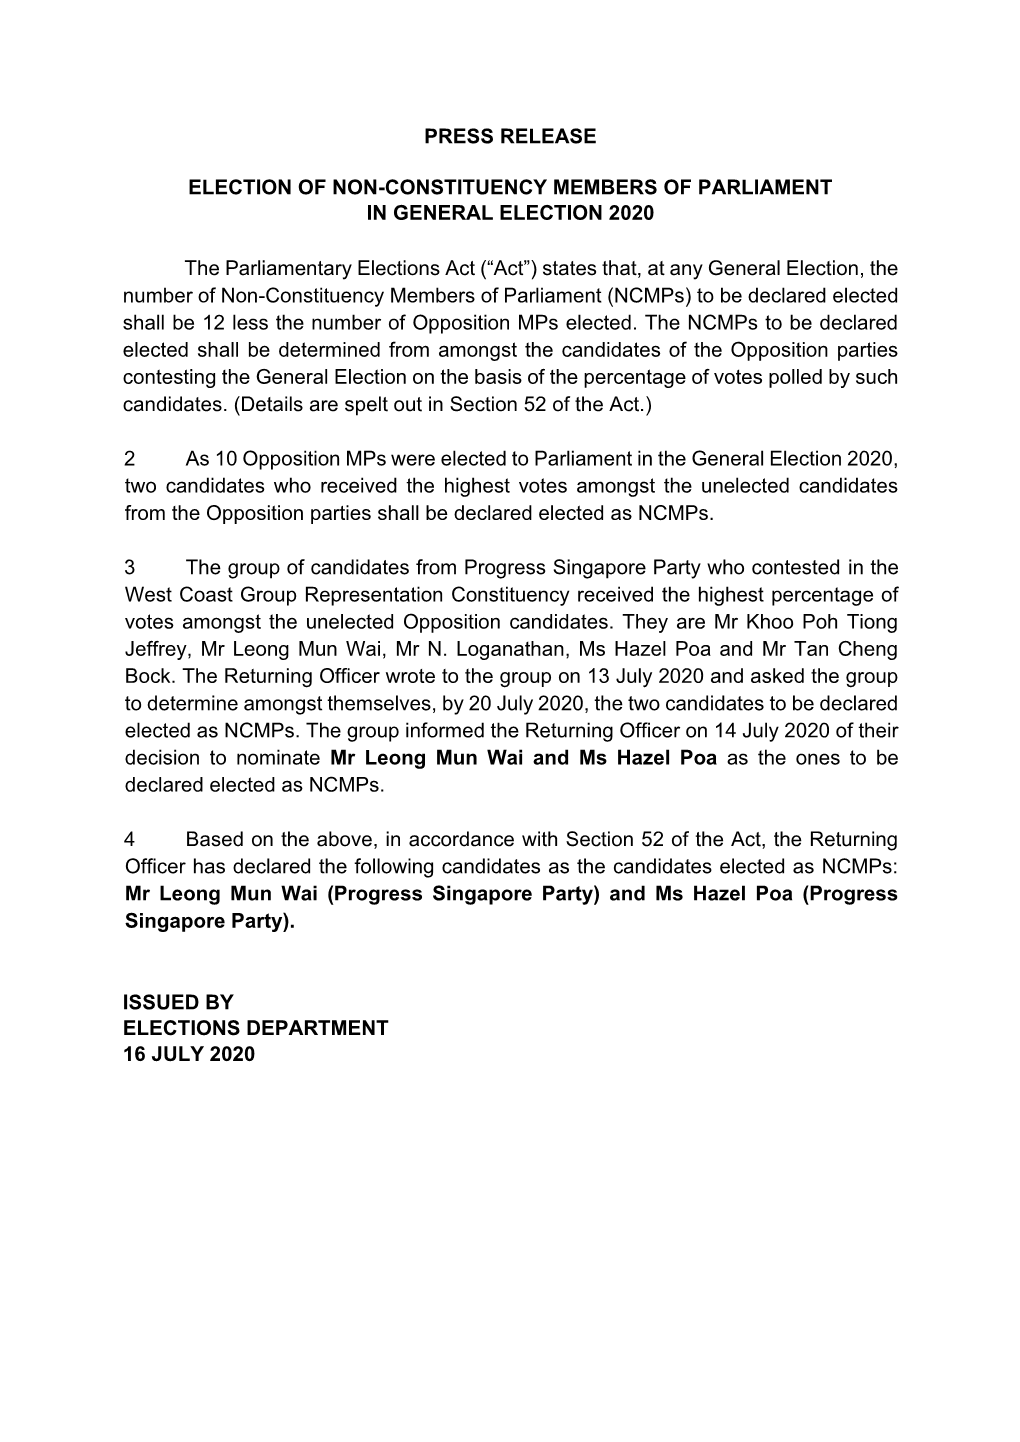 Press Release Election of Non-Constituency Members